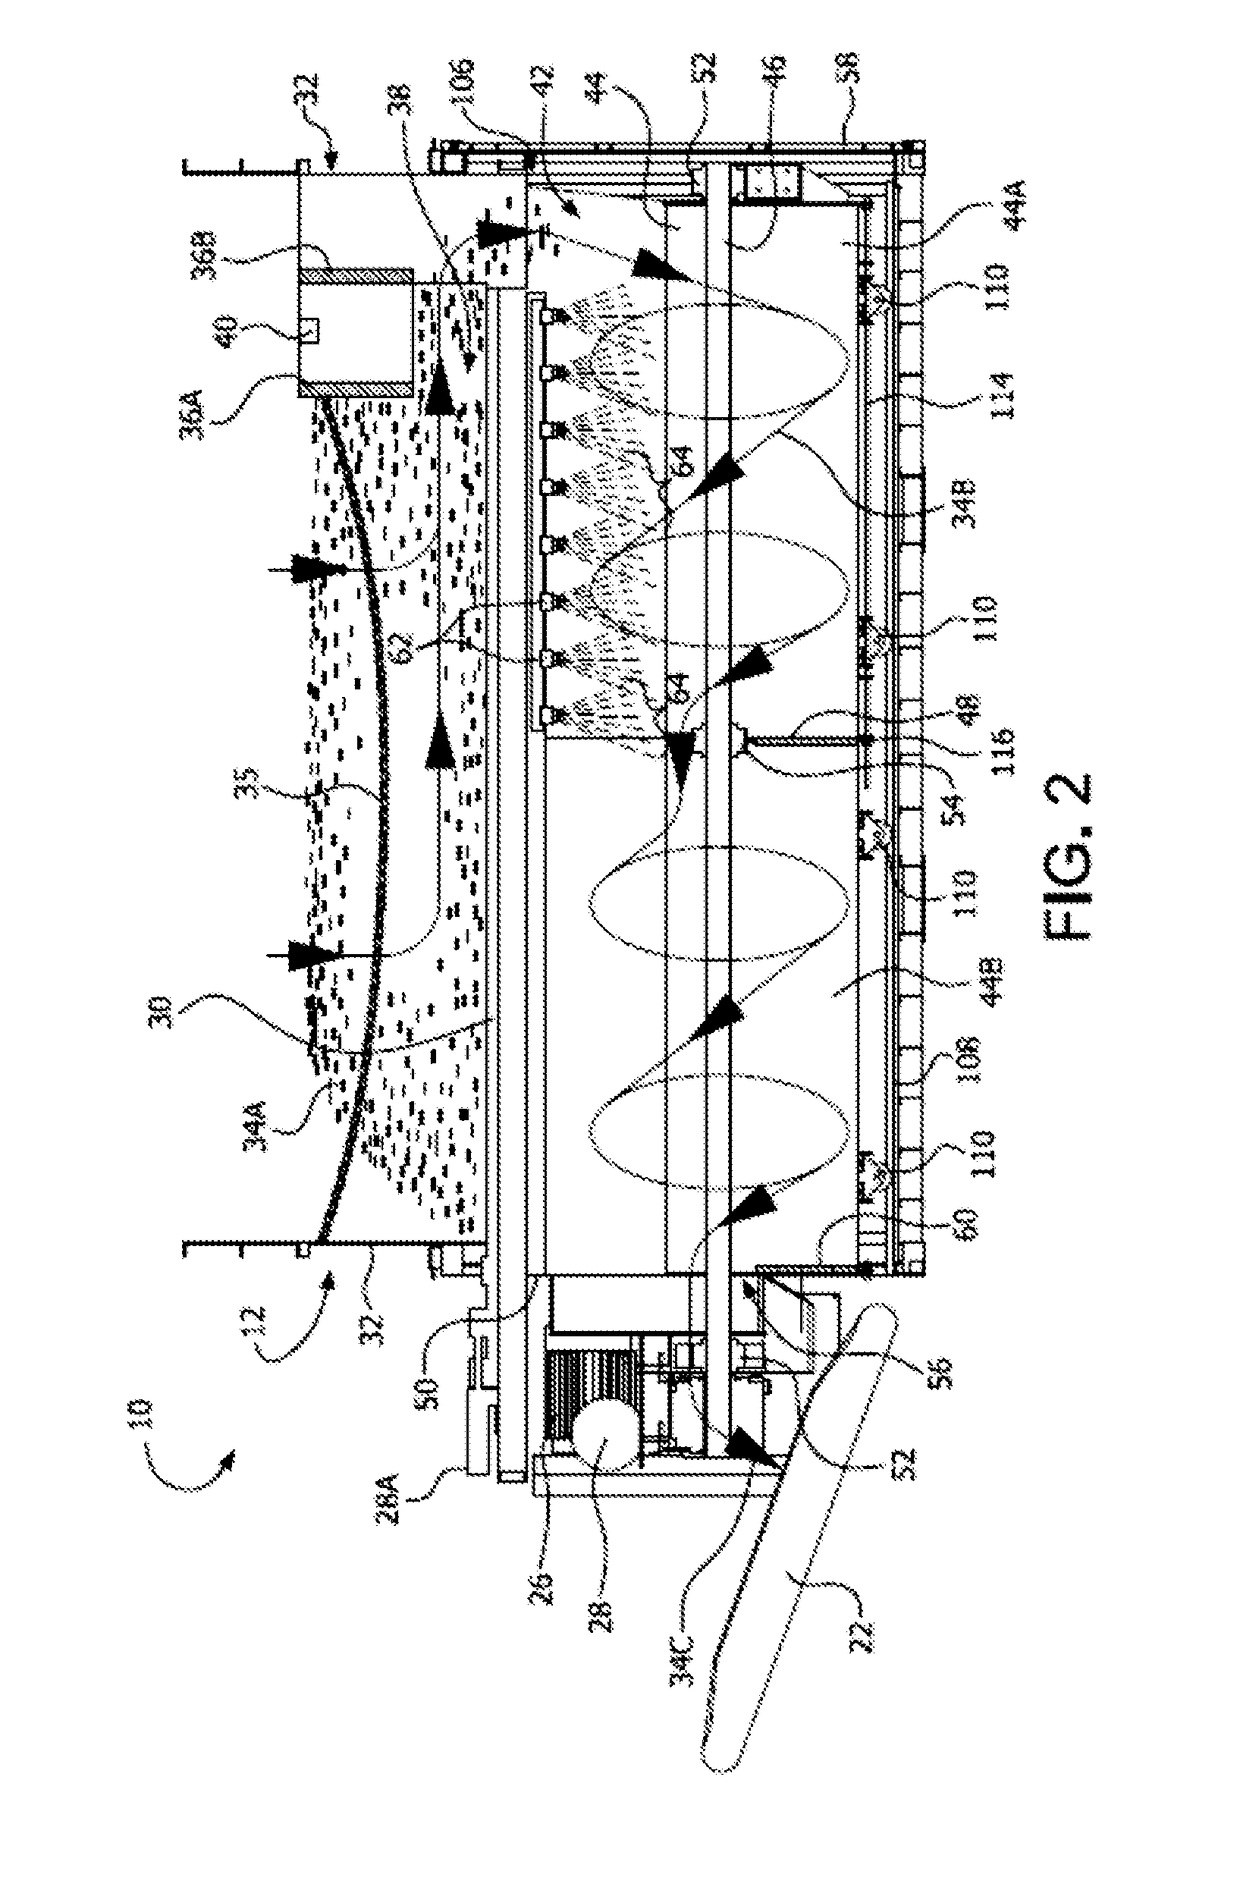 Functional treatment application to particulate materials such as mulch or potting soil